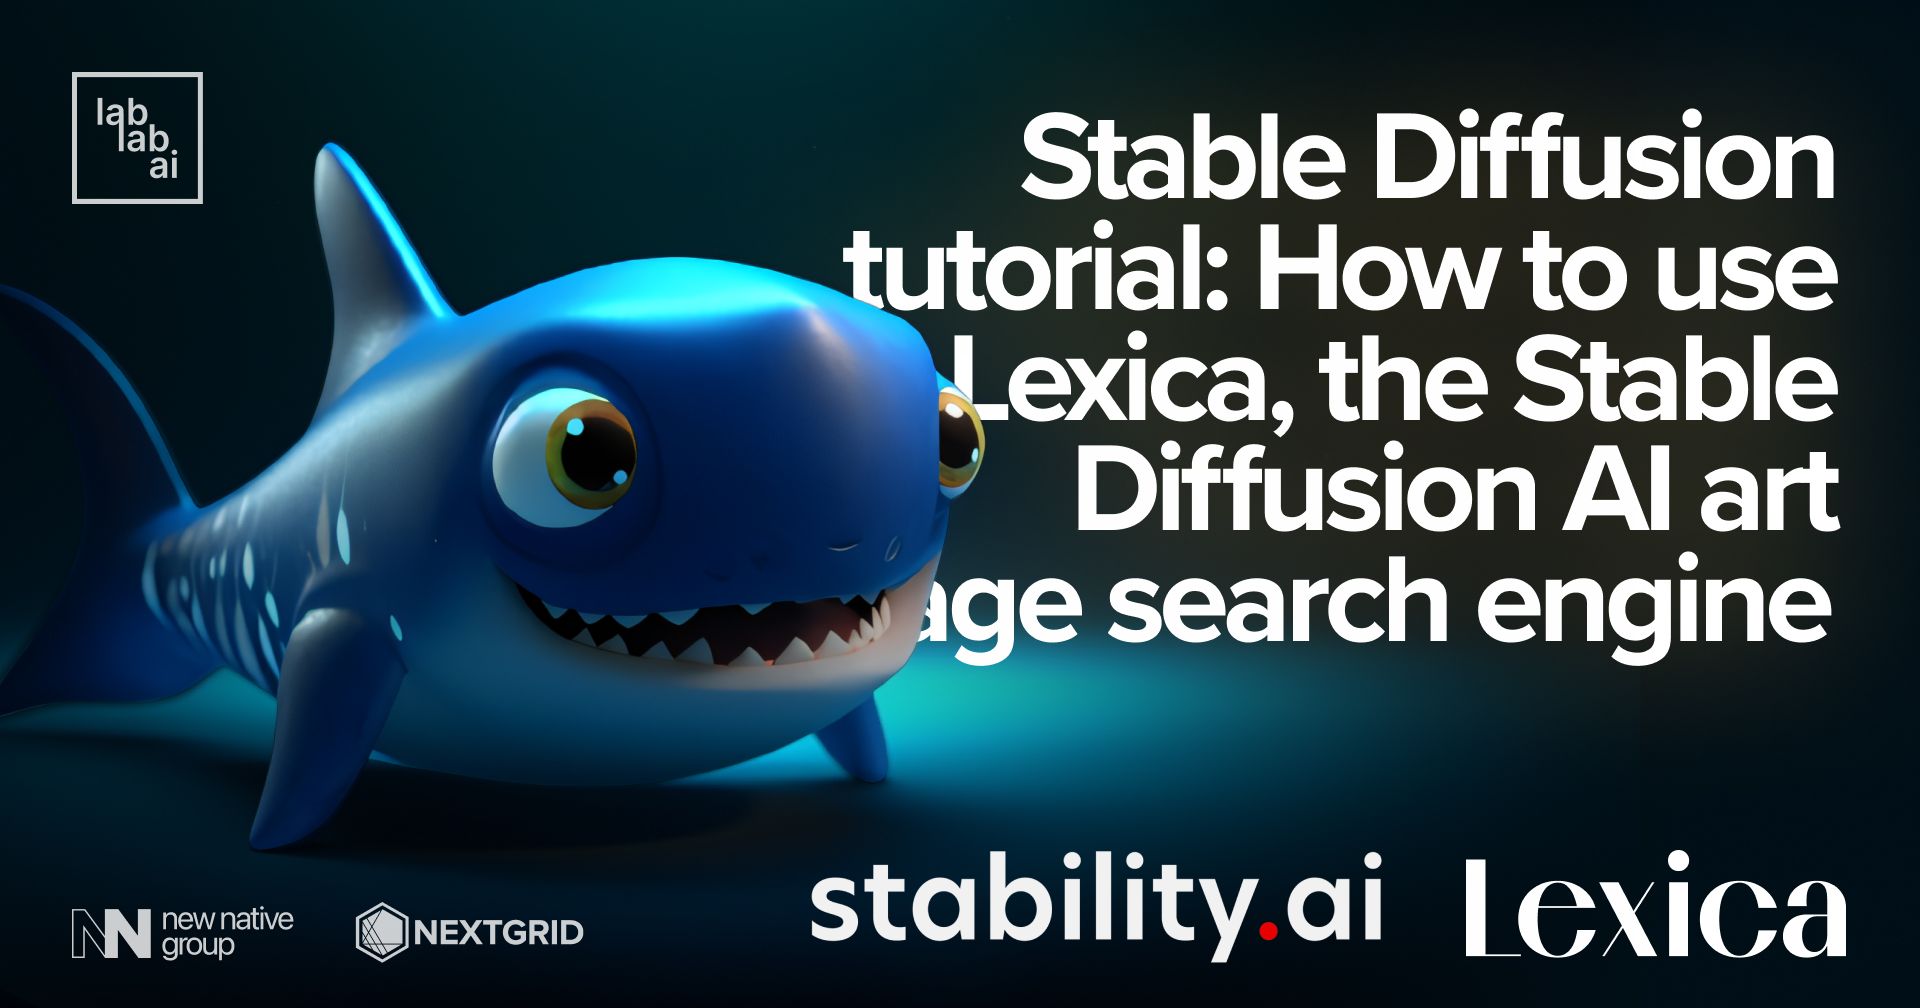 Stable Diffusion tutorial: How to use Lexica, the Stable Diffusion AI art image search engine